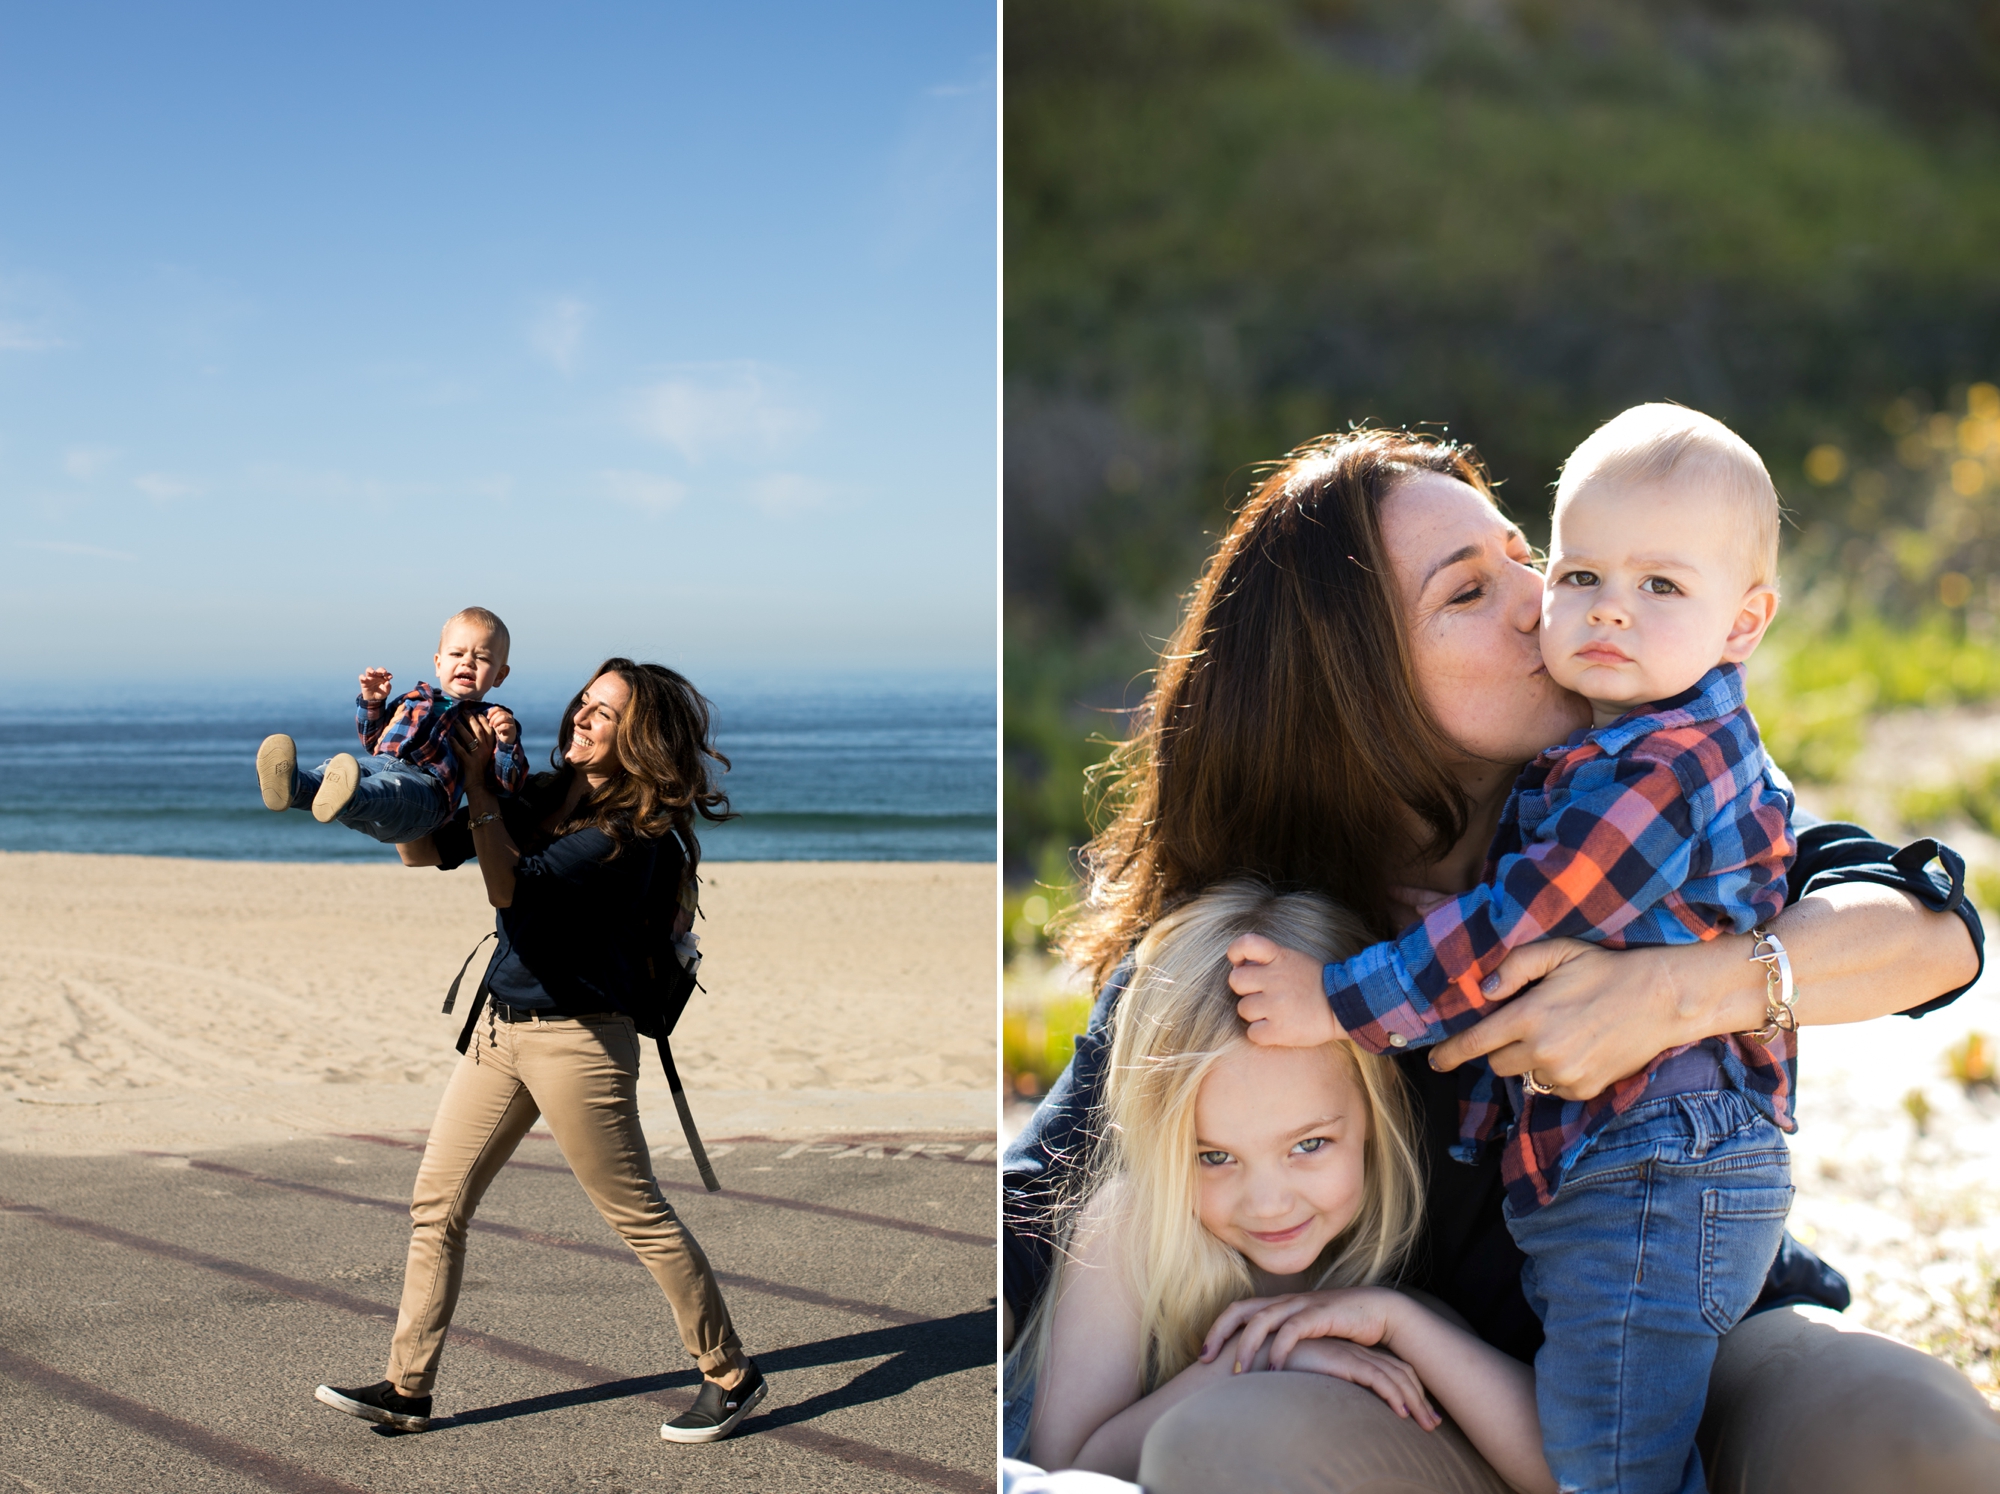 Mom plays with kids at beach in Malibu